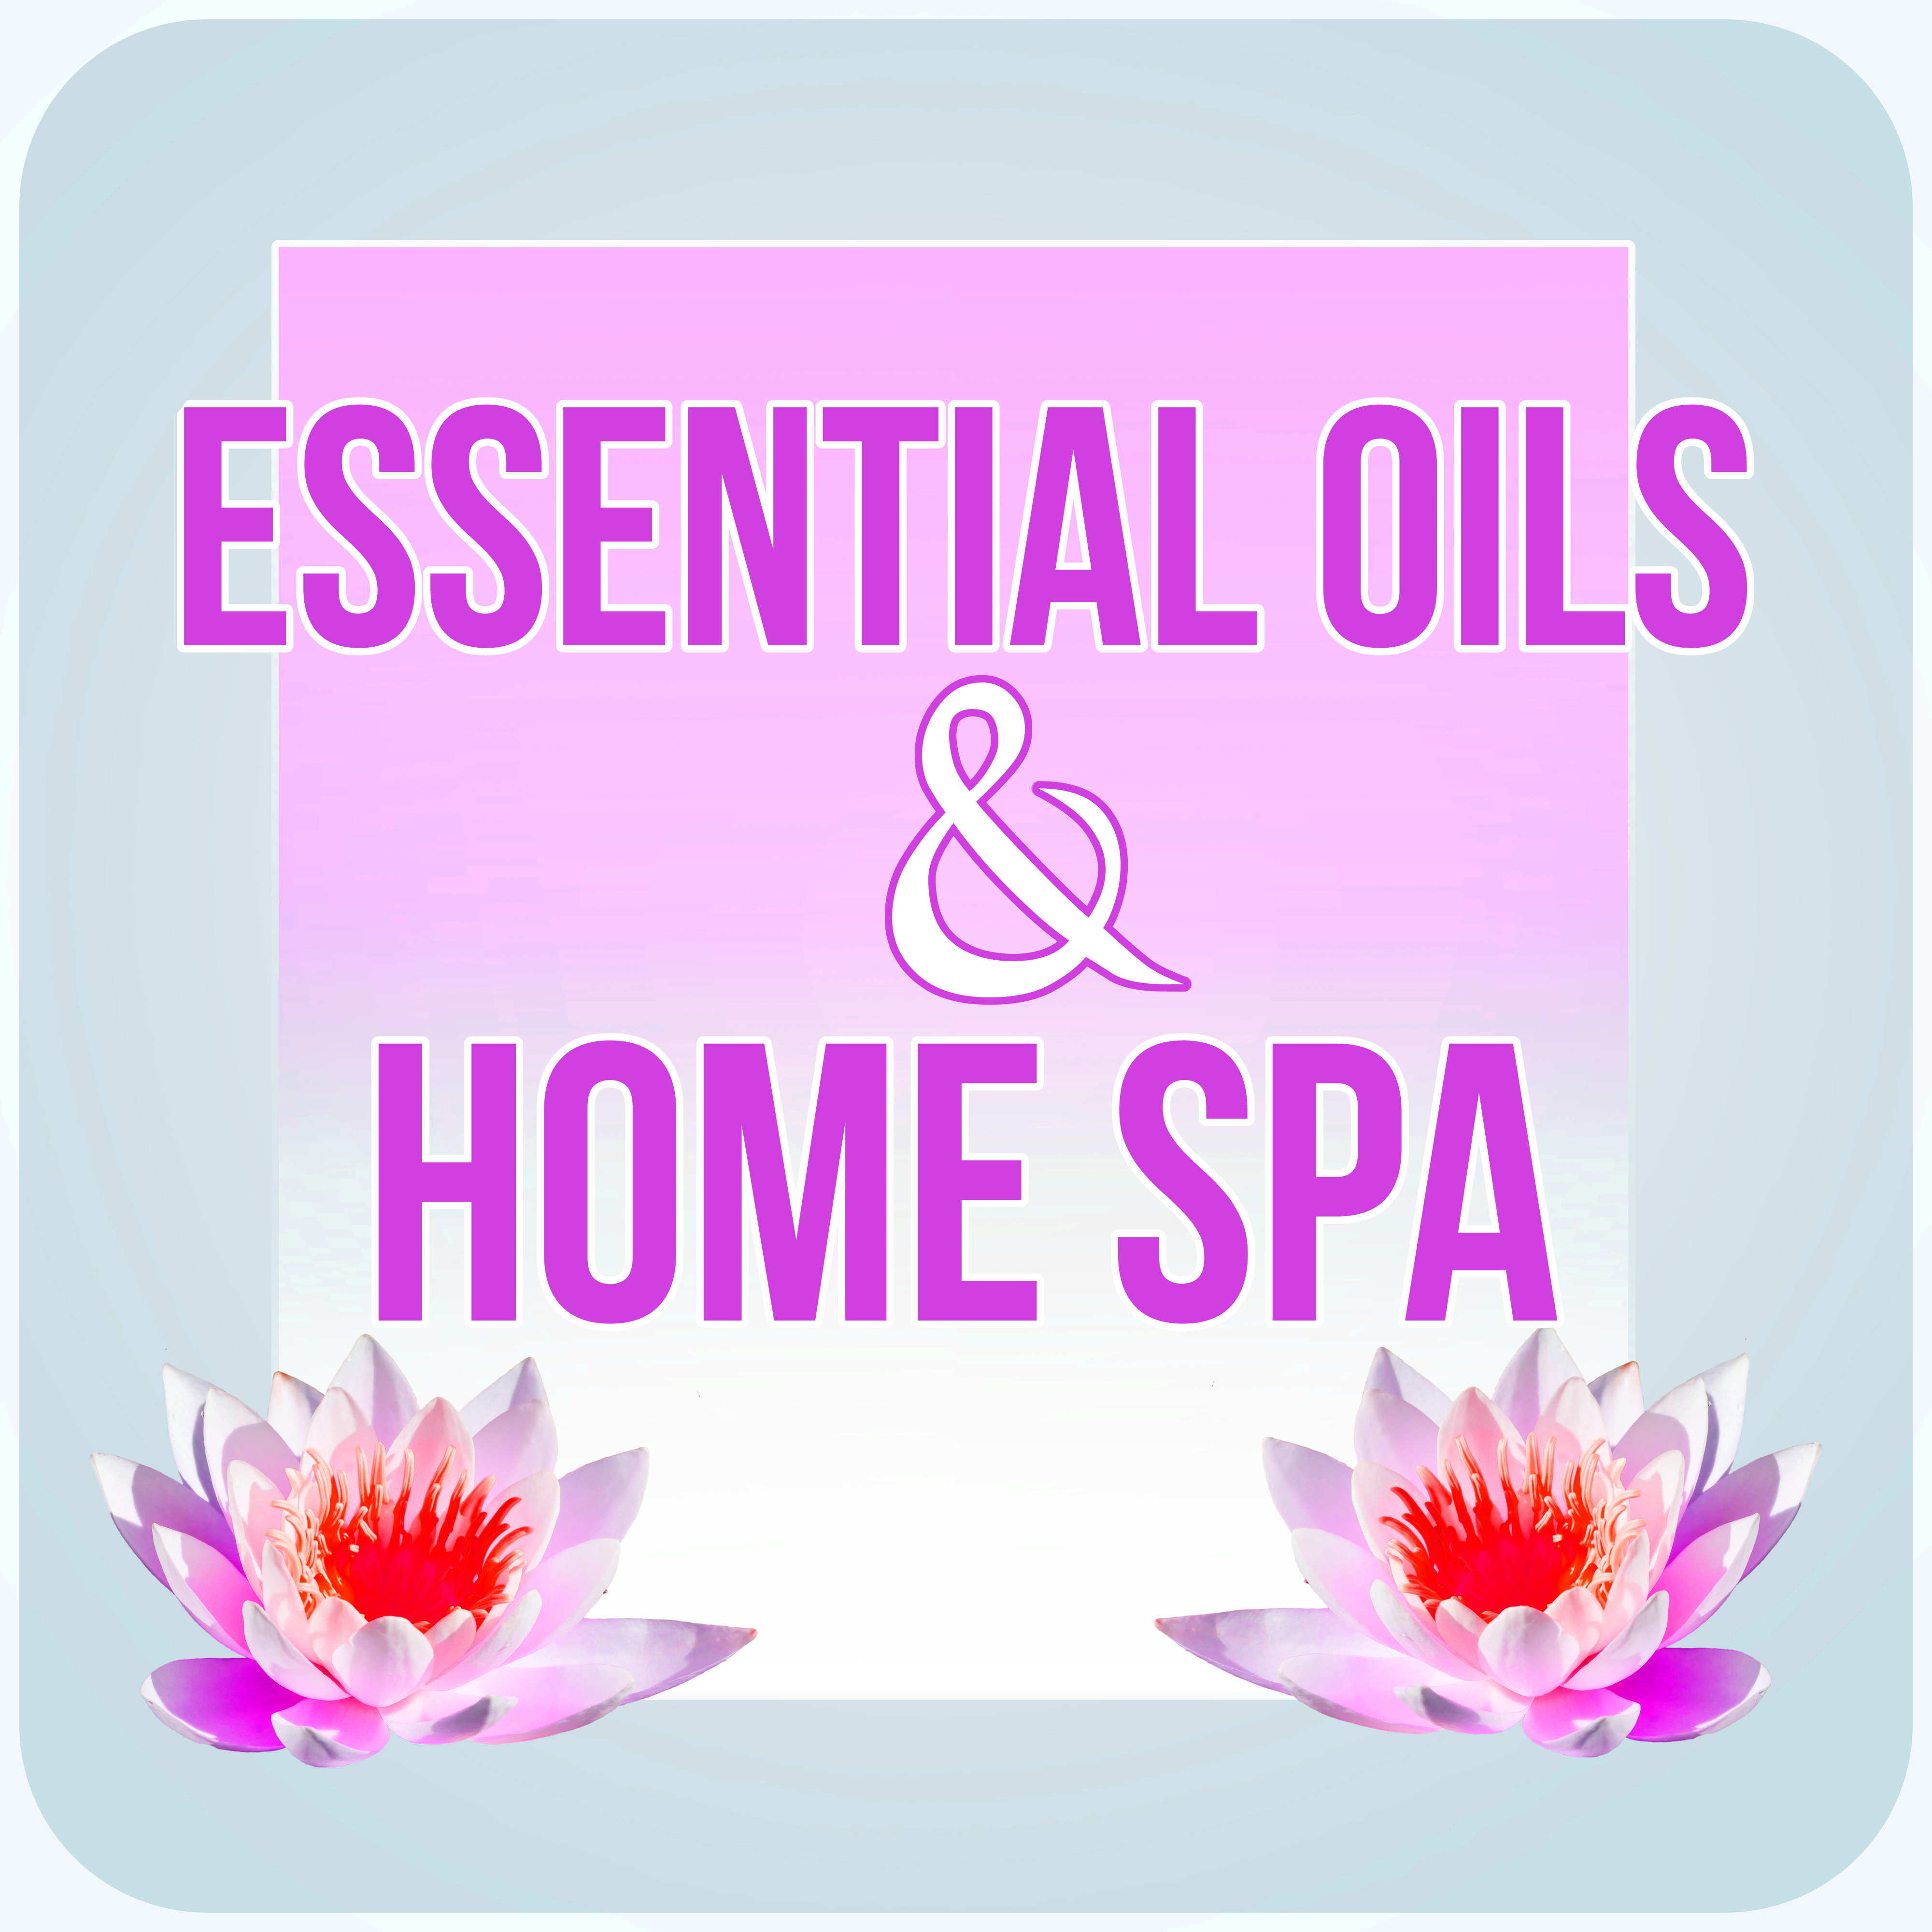 Essential Oils & Home Spa - Nature Sounds for Massage Therapy & Intimate Moments, Sensual Massage Music